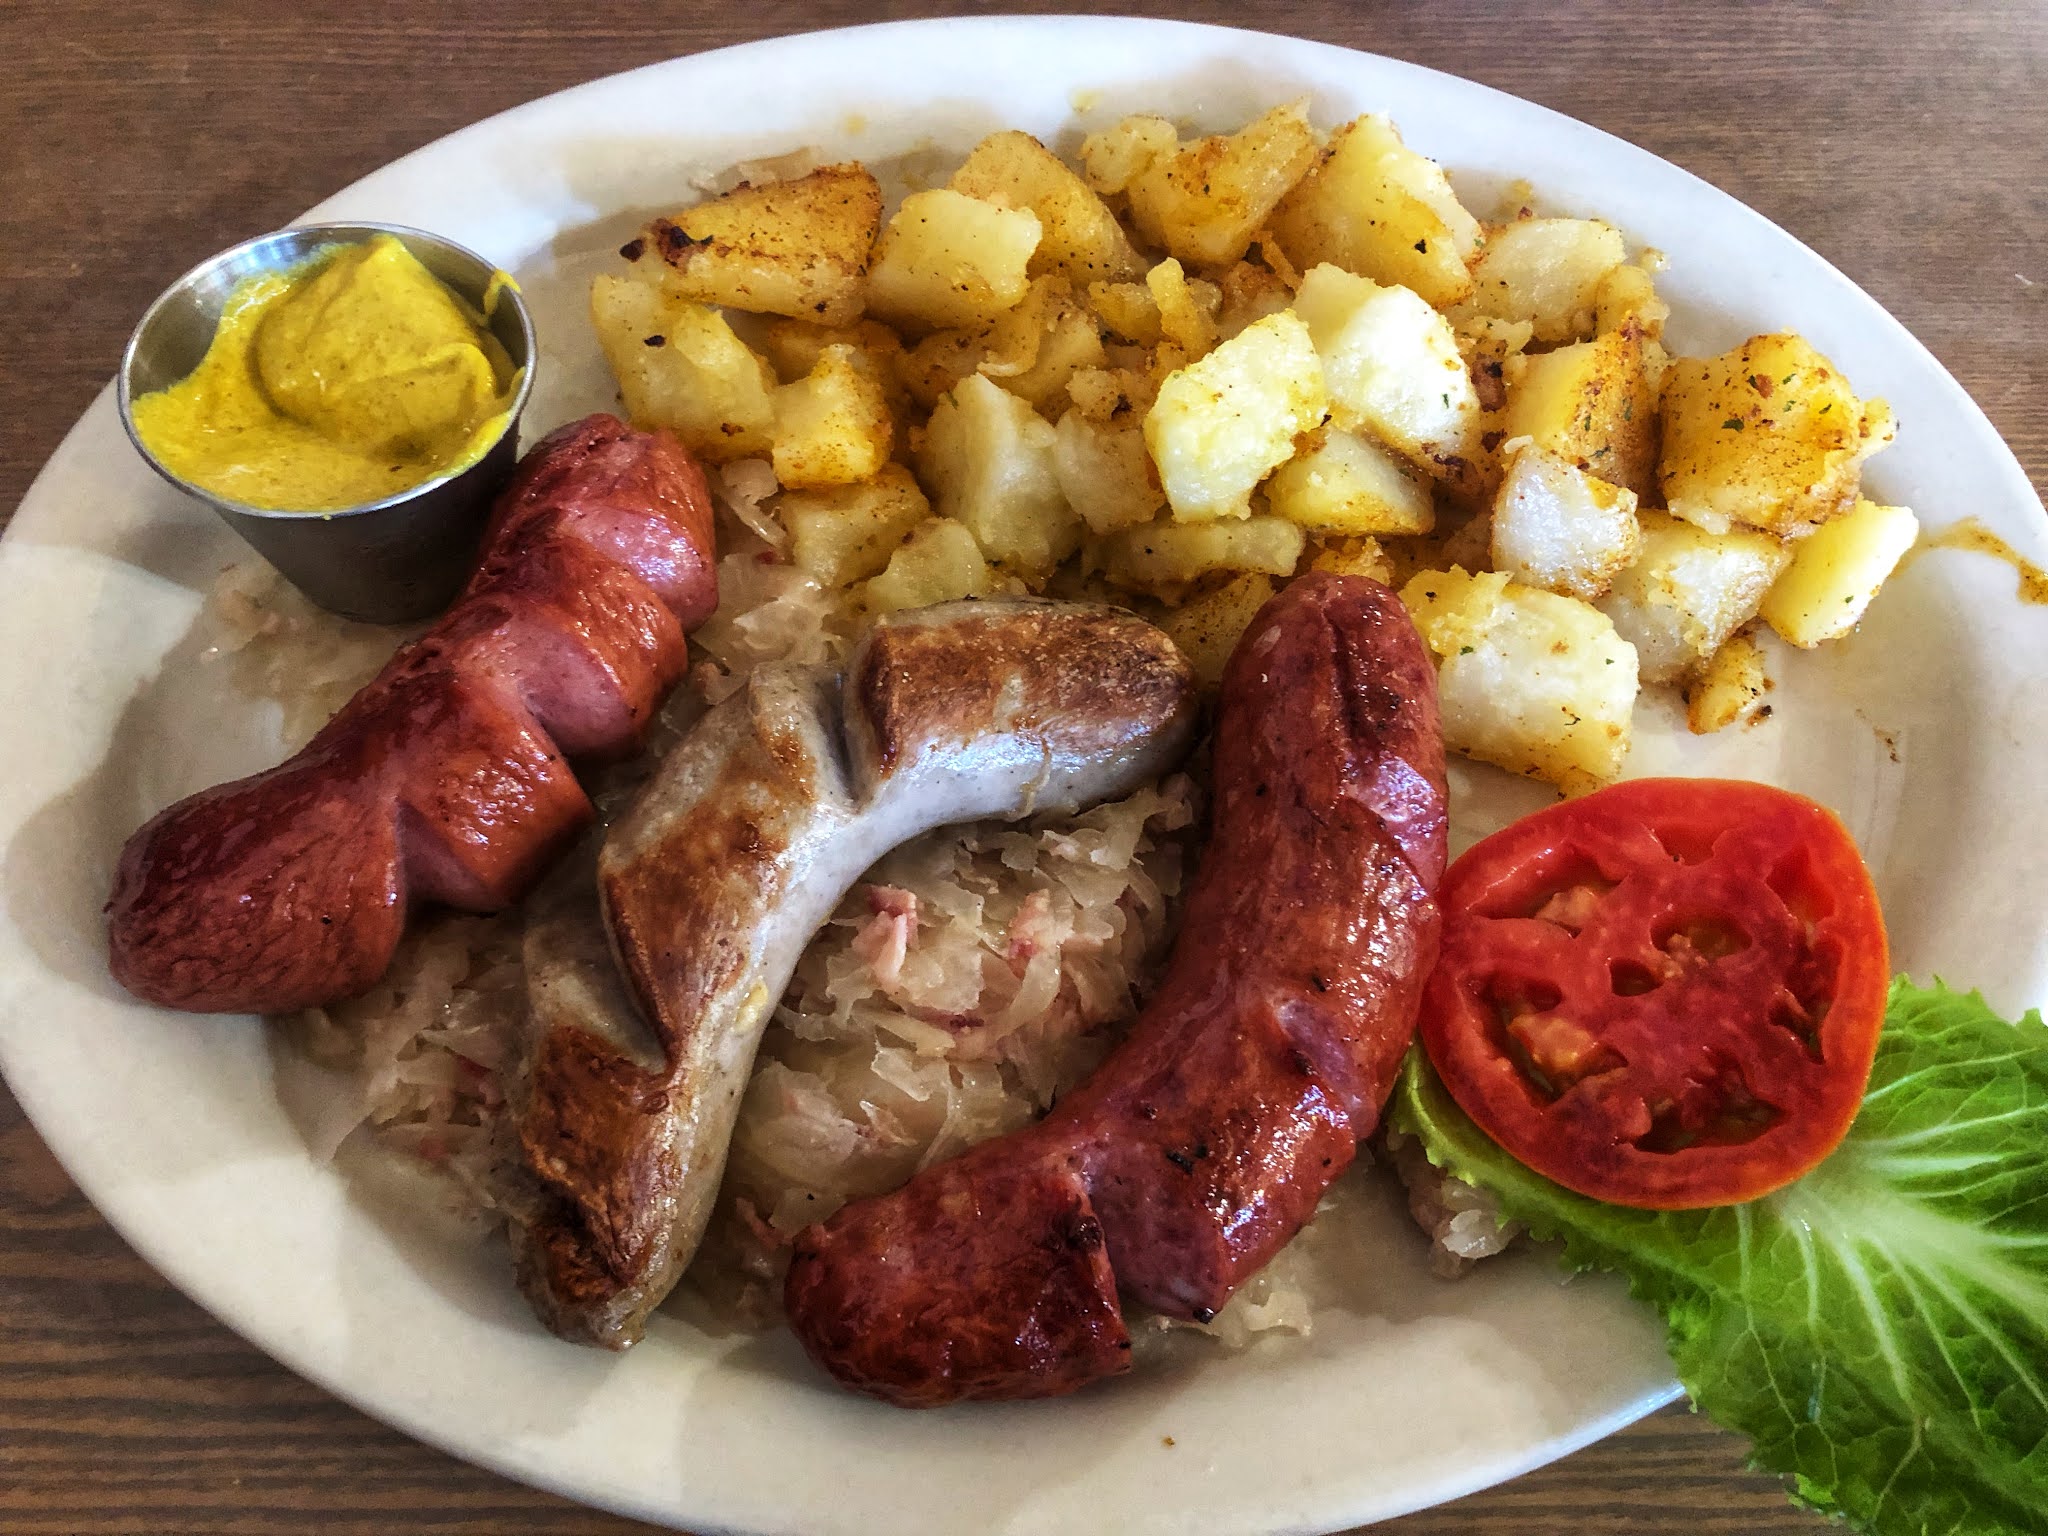 German sausage served with spicy mustard, potatoes, and bacon sauerkraut